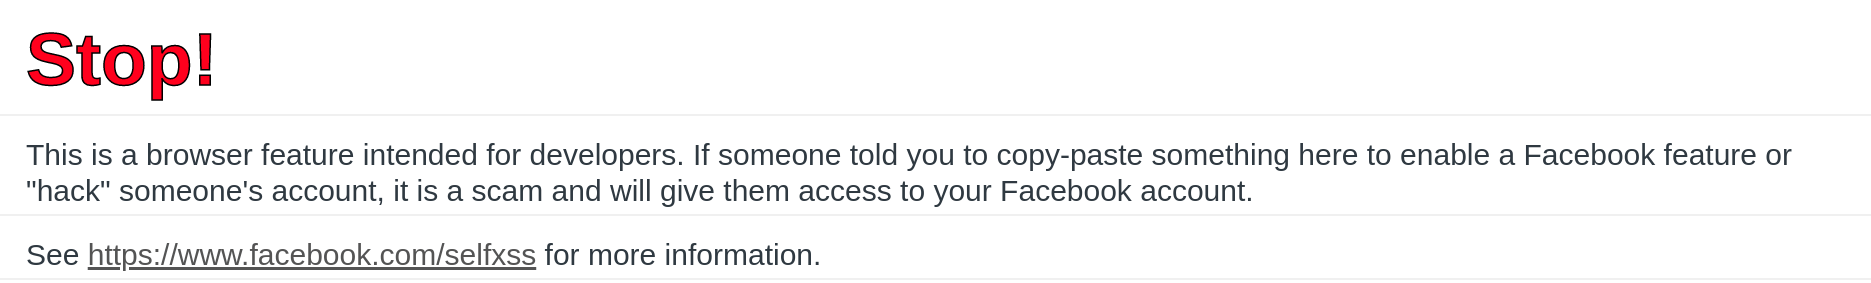 Facebook Console Warning for Self XSS